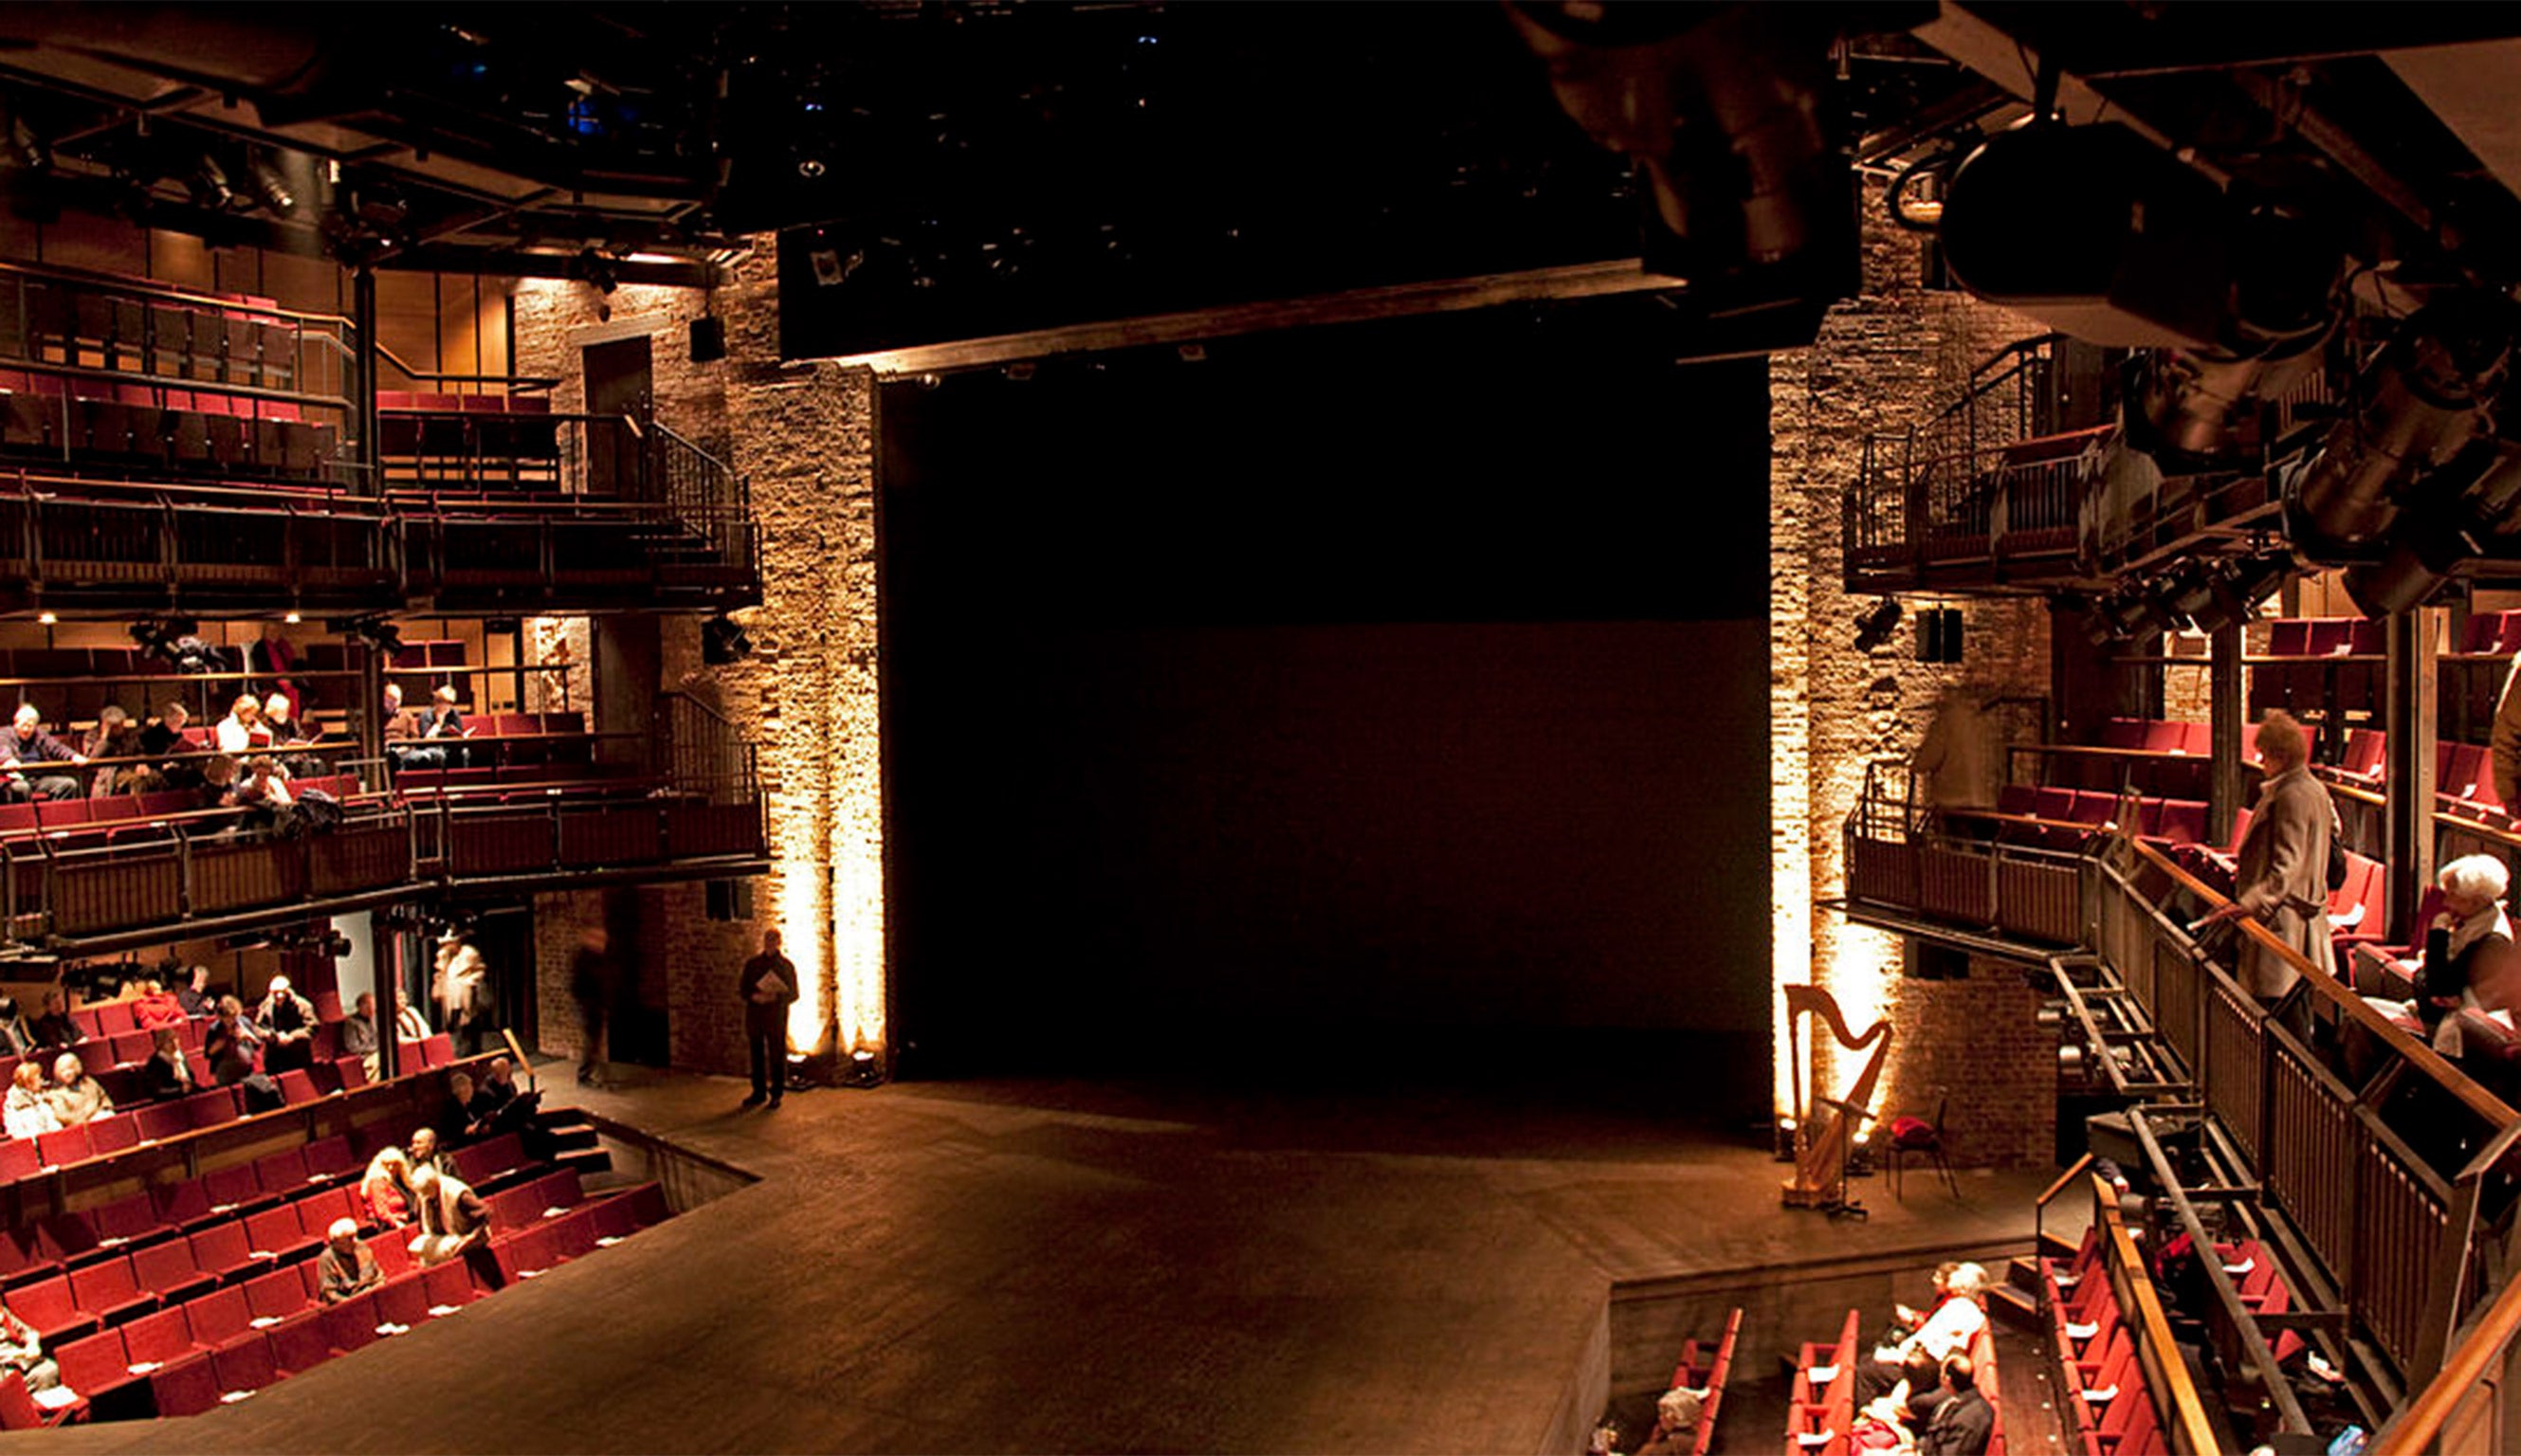 Royal Shakespeare Company’s Swan Theatre in Stratford-upon-Avon